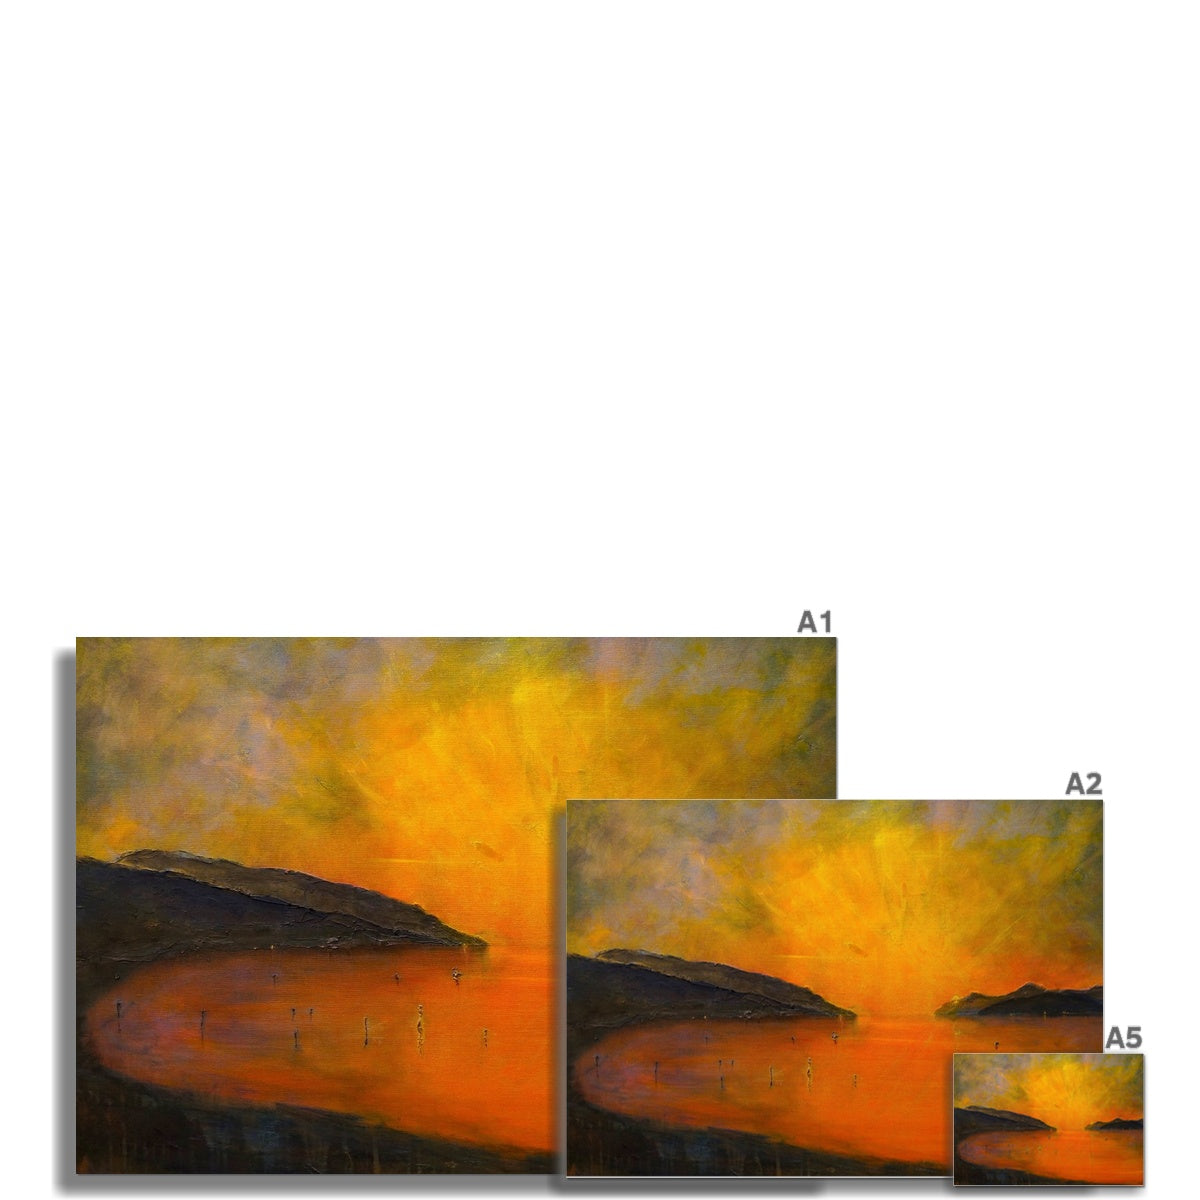 Loch Ness Sunset Painting | Fine Art Prints From Scotland-Unframed Prints-Scottish Lochs & Mountains Art Gallery-Paintings, Prints, Homeware, Art Gifts From Scotland By Scottish Artist Kevin Hunter